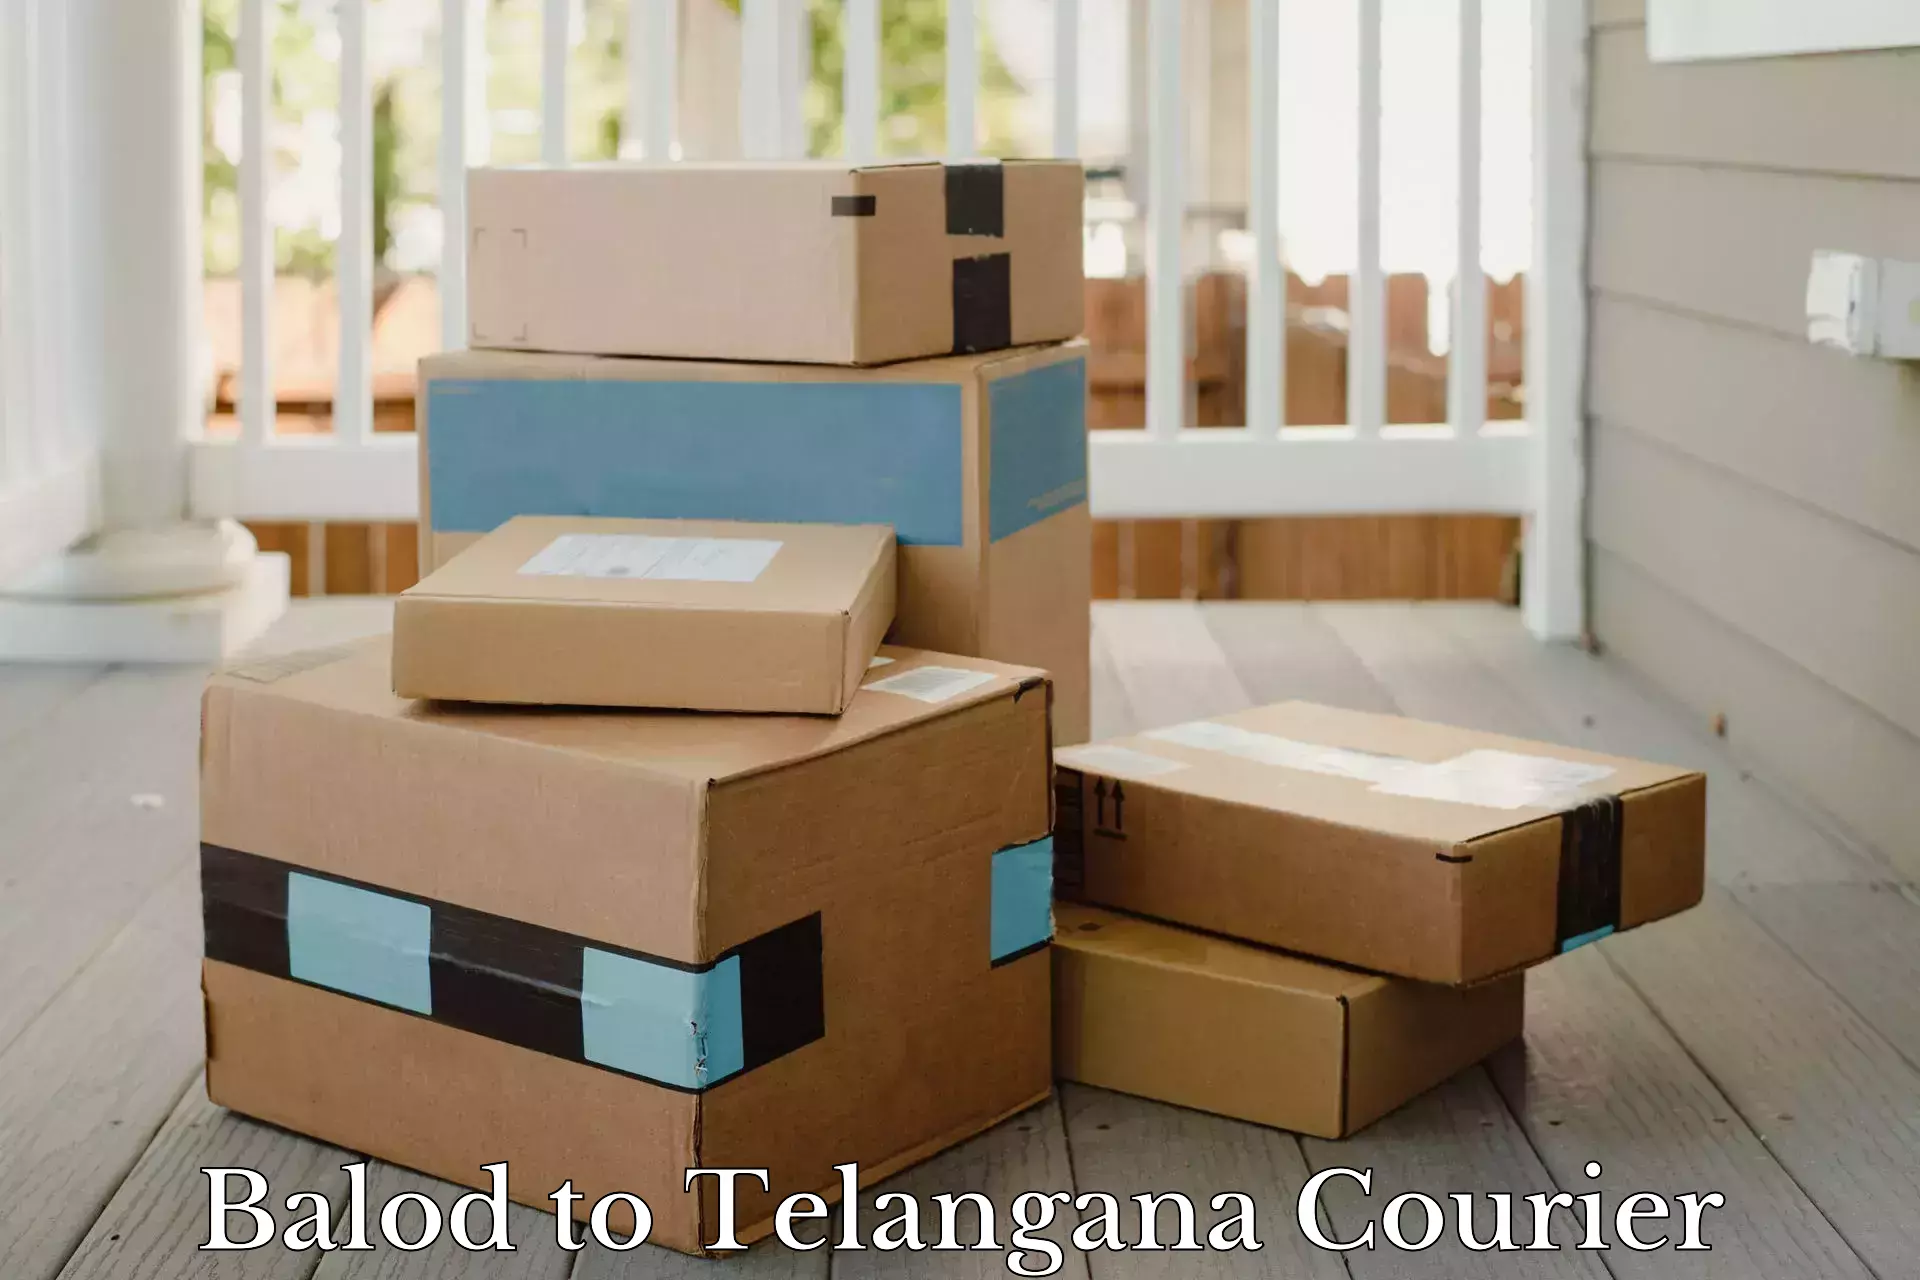 Full-service courier options Balod to Telangana